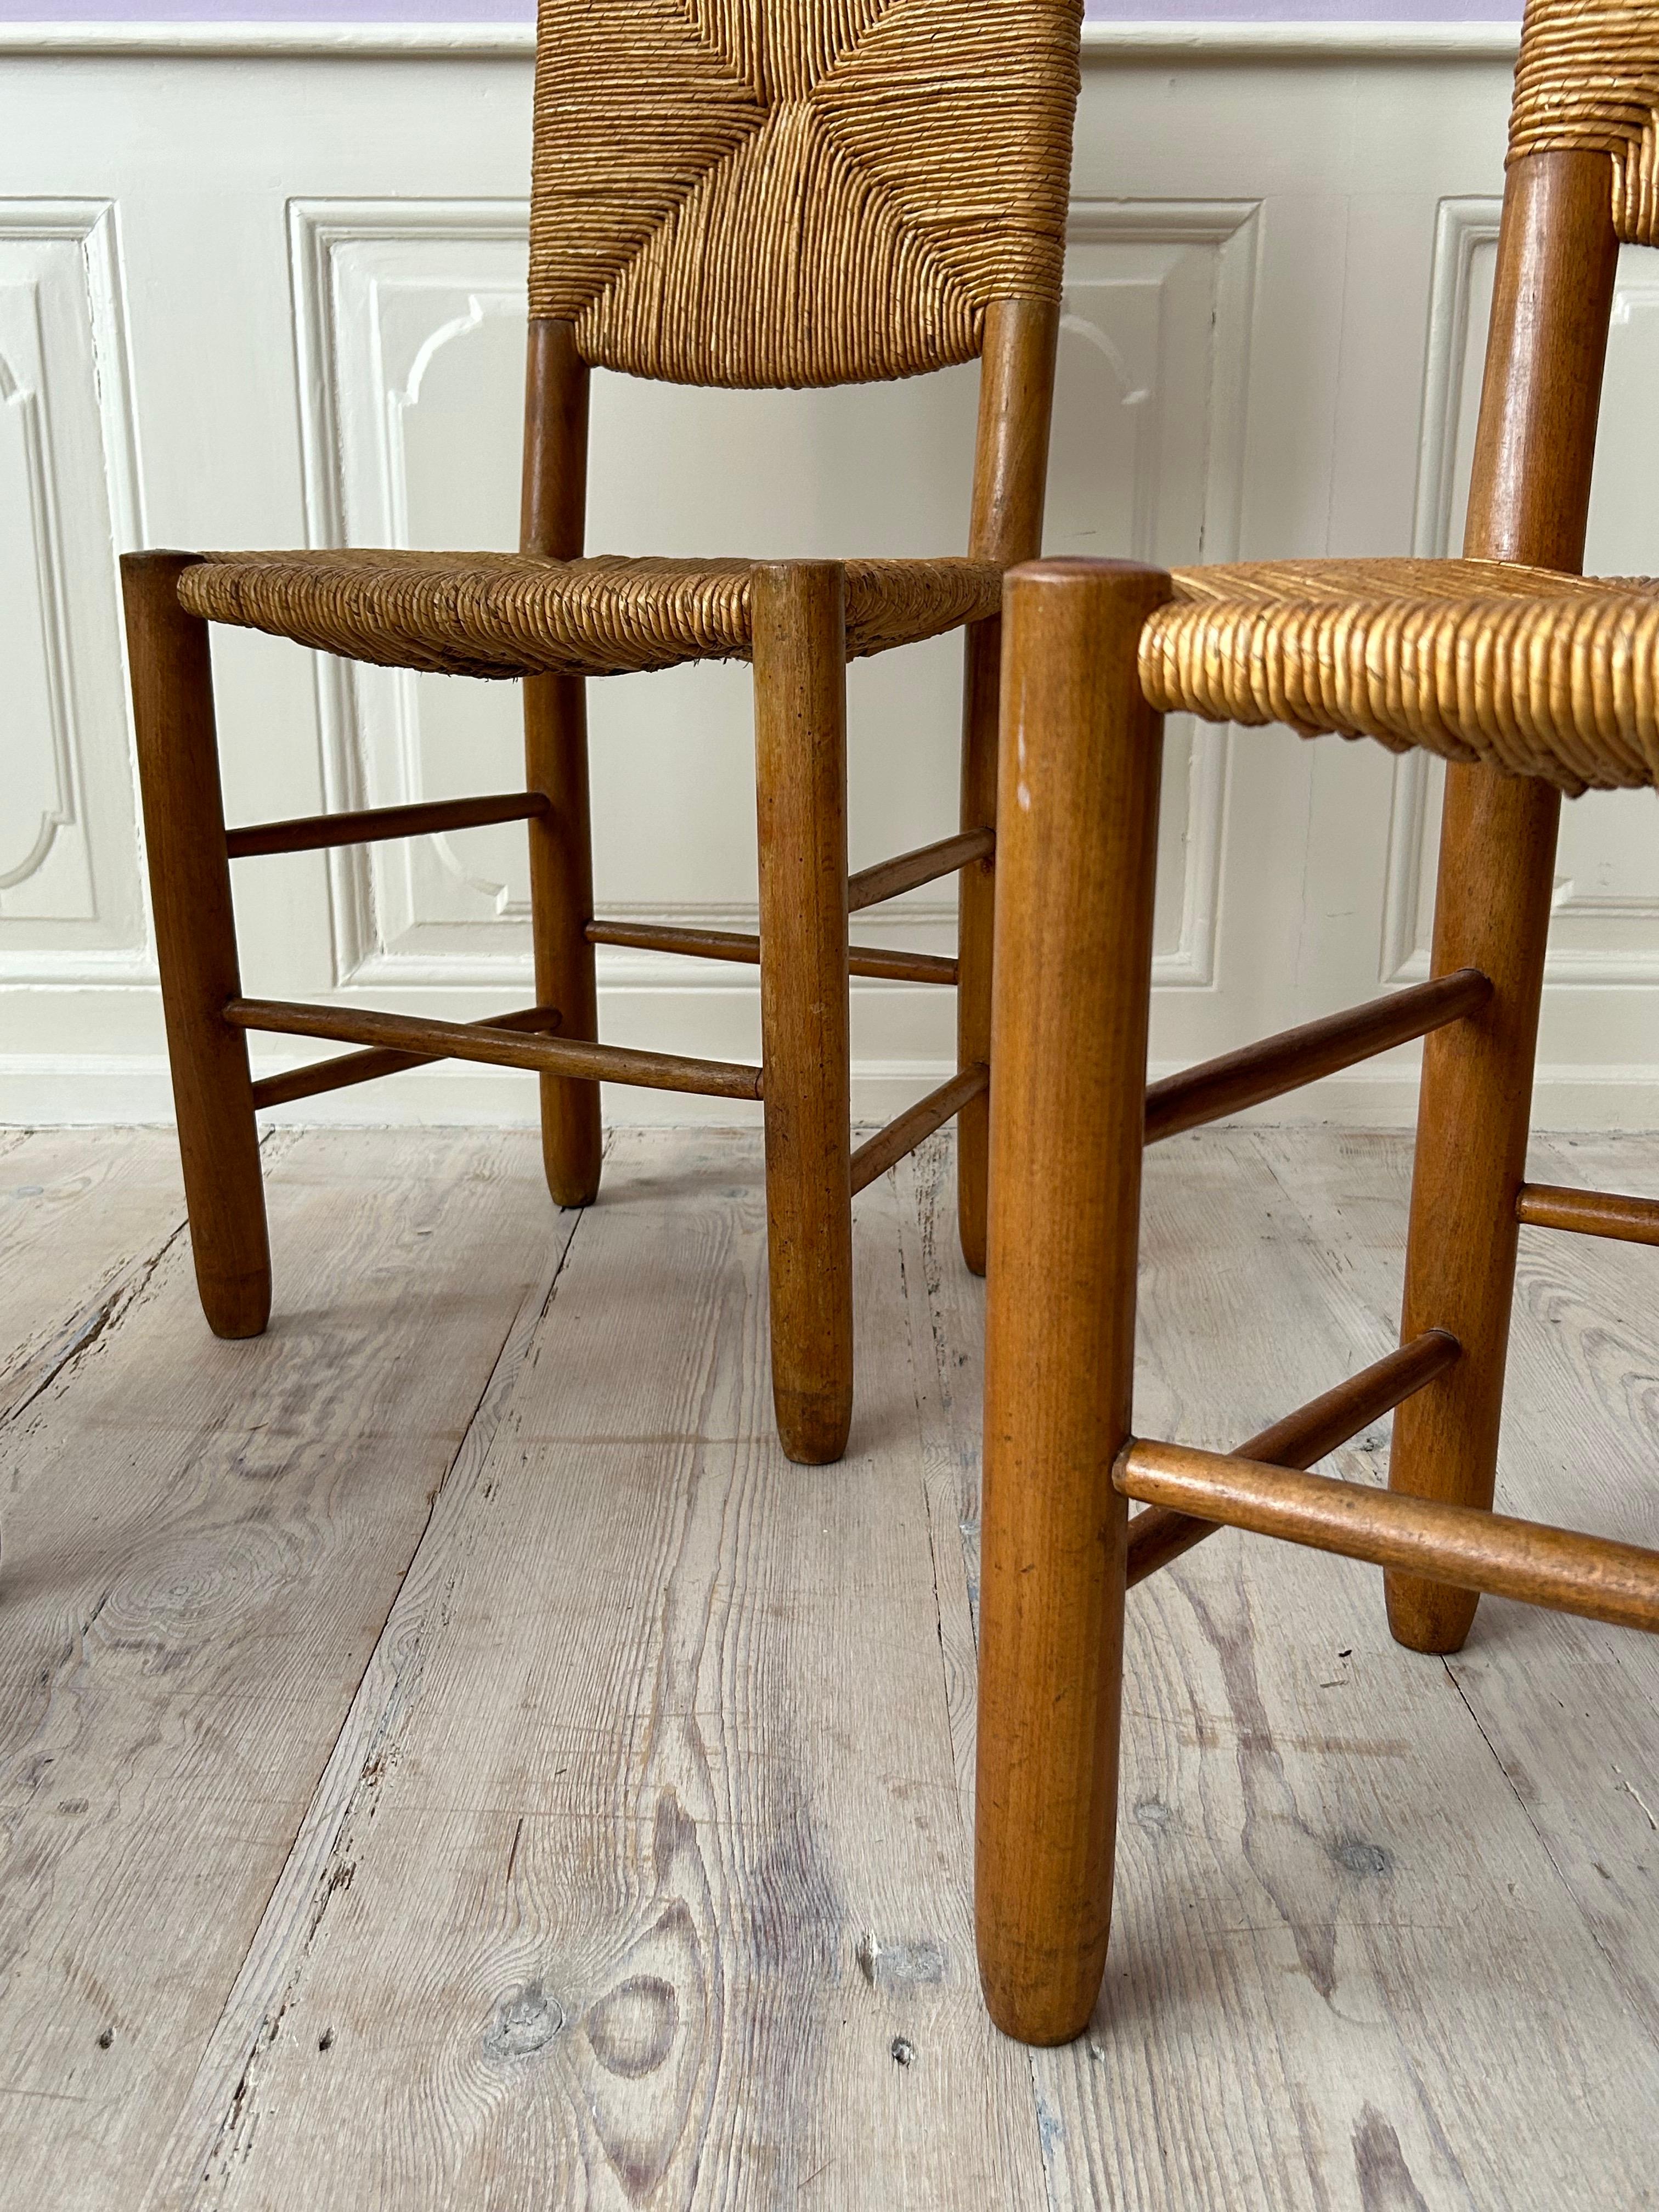 Vintage Set of Four Chairs in Ash and Straw, France, 1950s For Sale 6